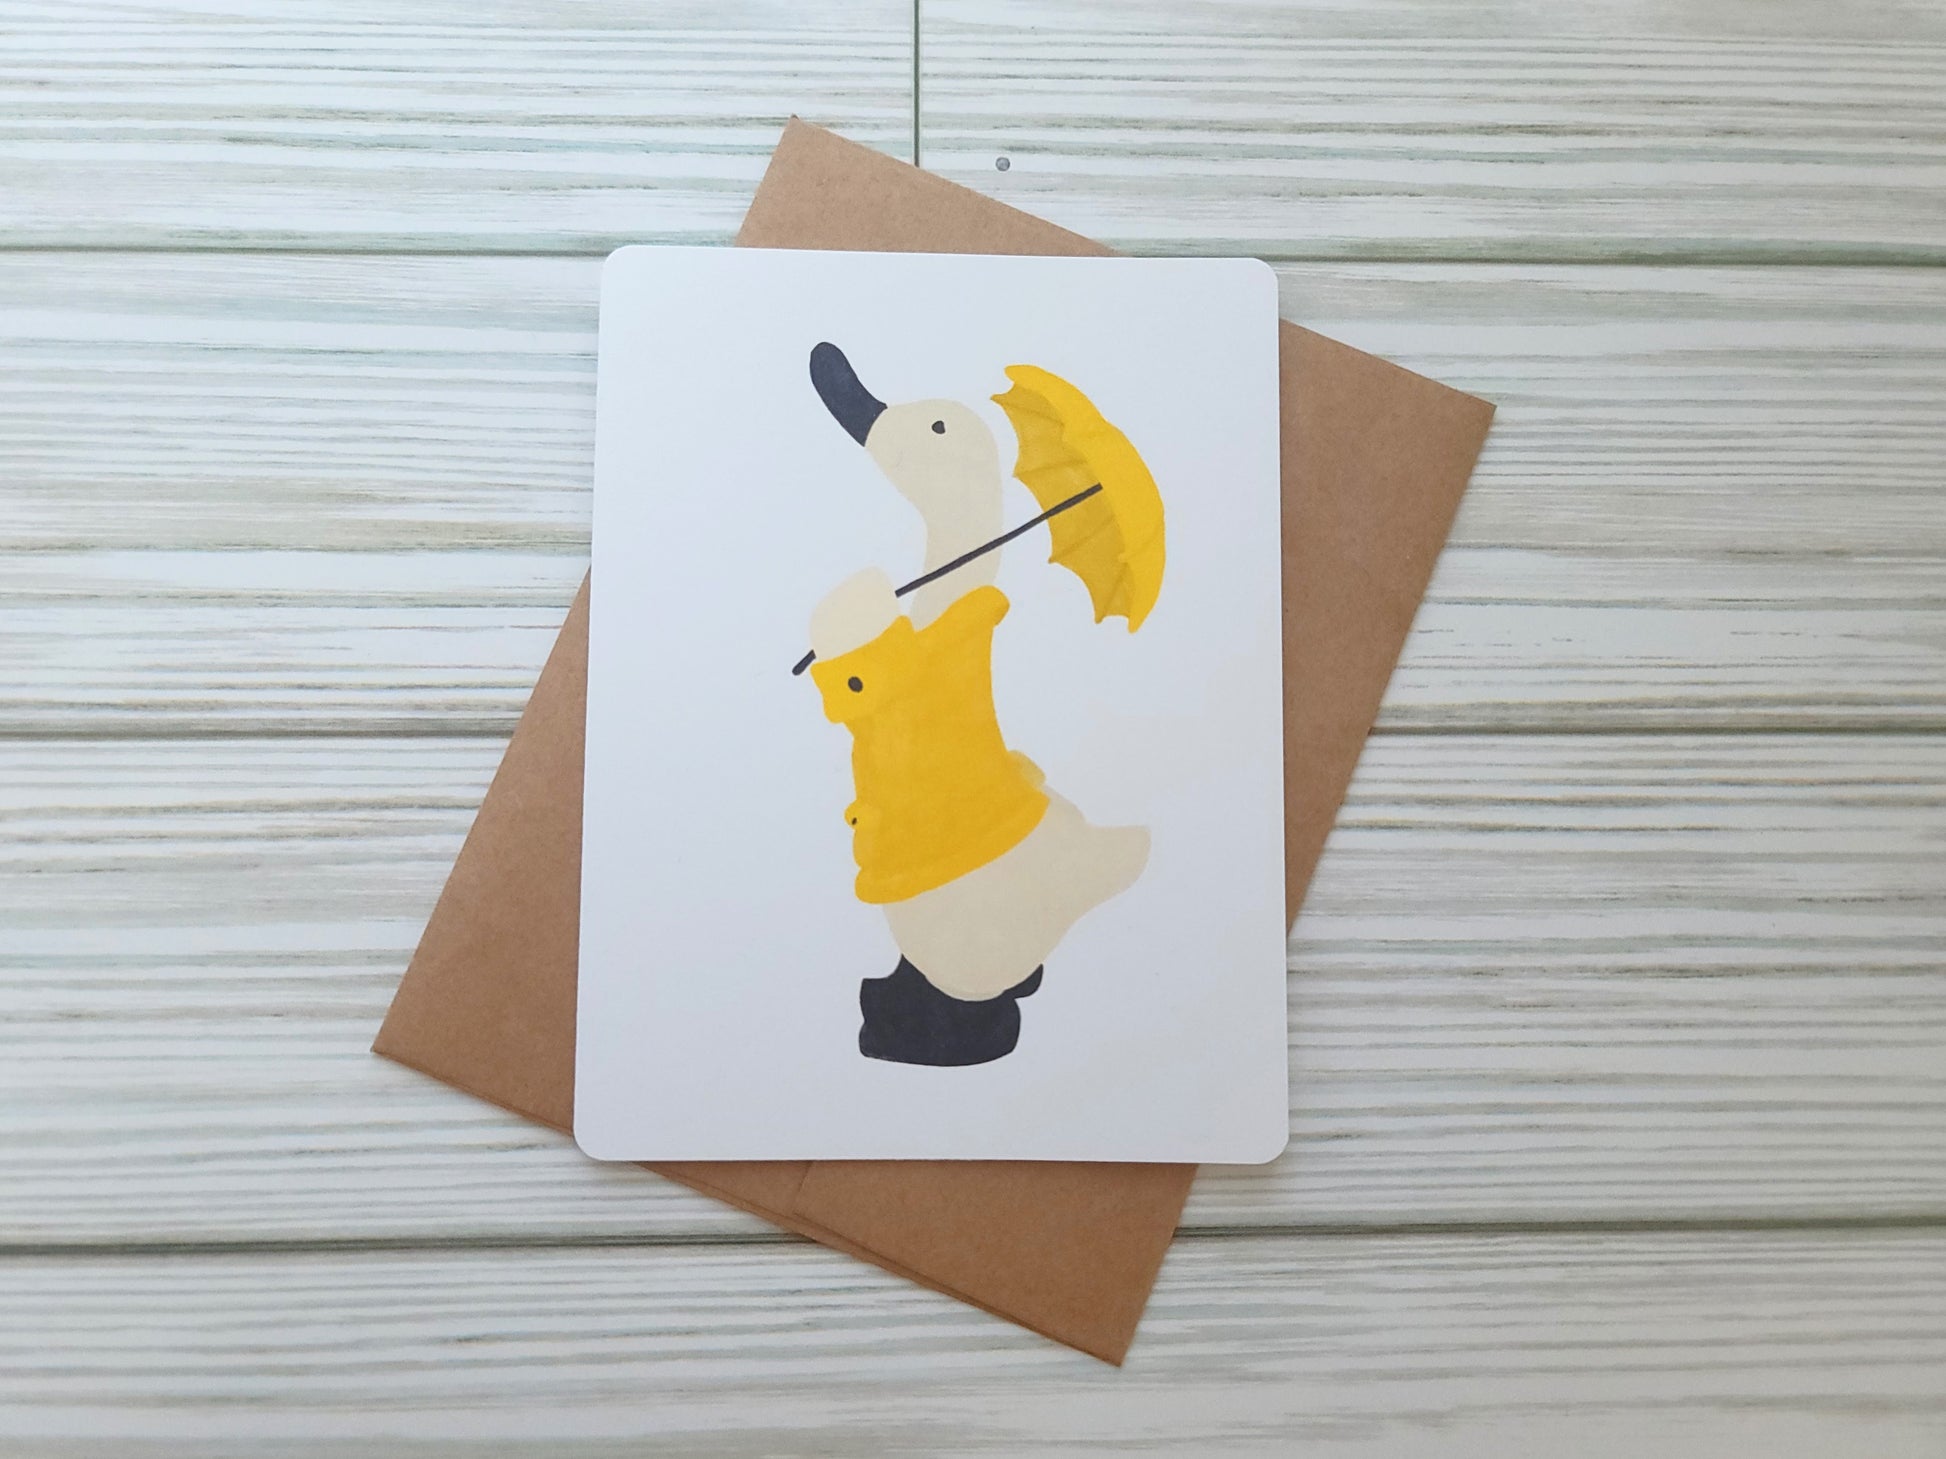 Duck in a Yellow Rainjacket with Umbrella Handmade Greeting Card - Recycled Paper and Kraft Envelope - Landscape Overhead Shot